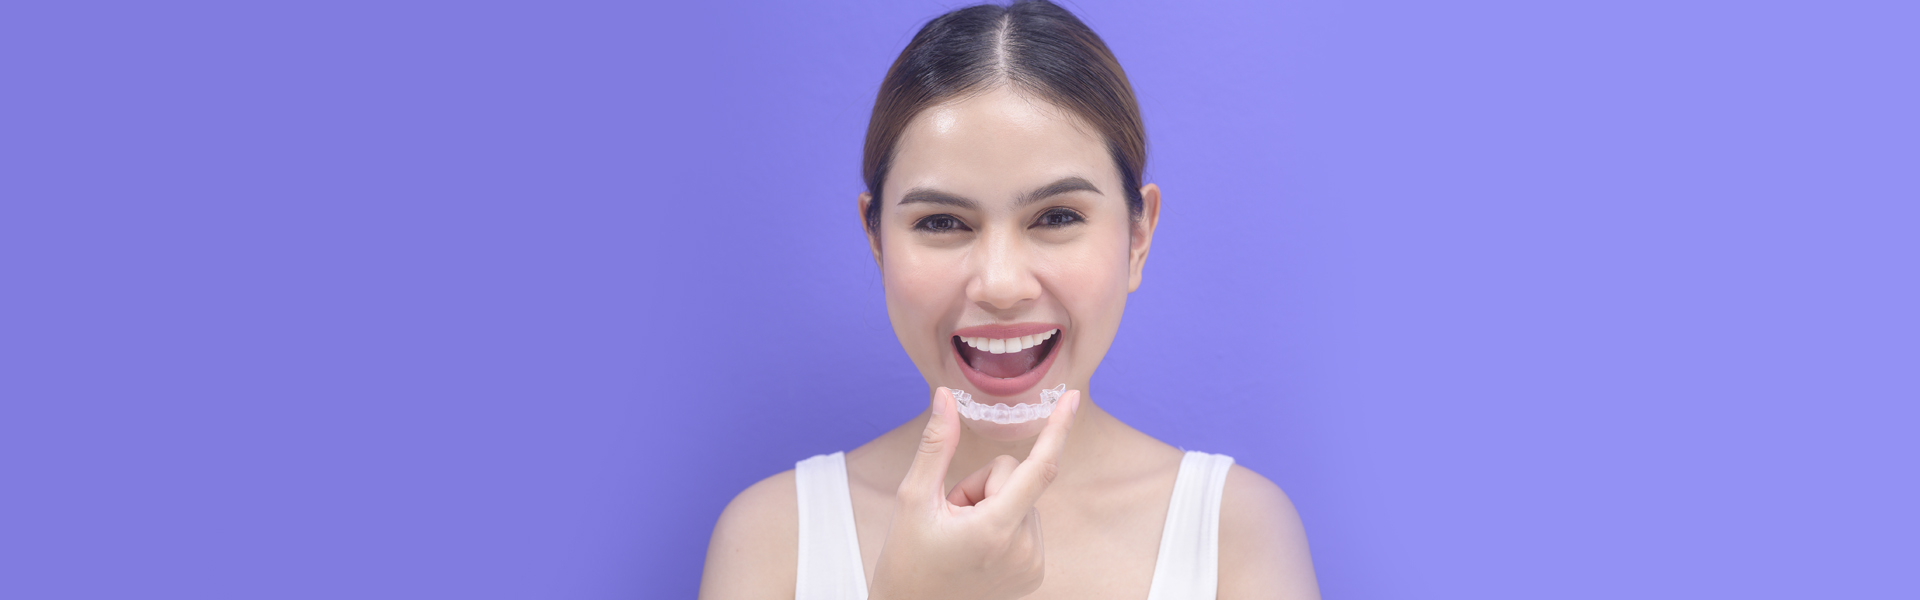 Why Invisalign Is a Great Option for Teeth Alignment?